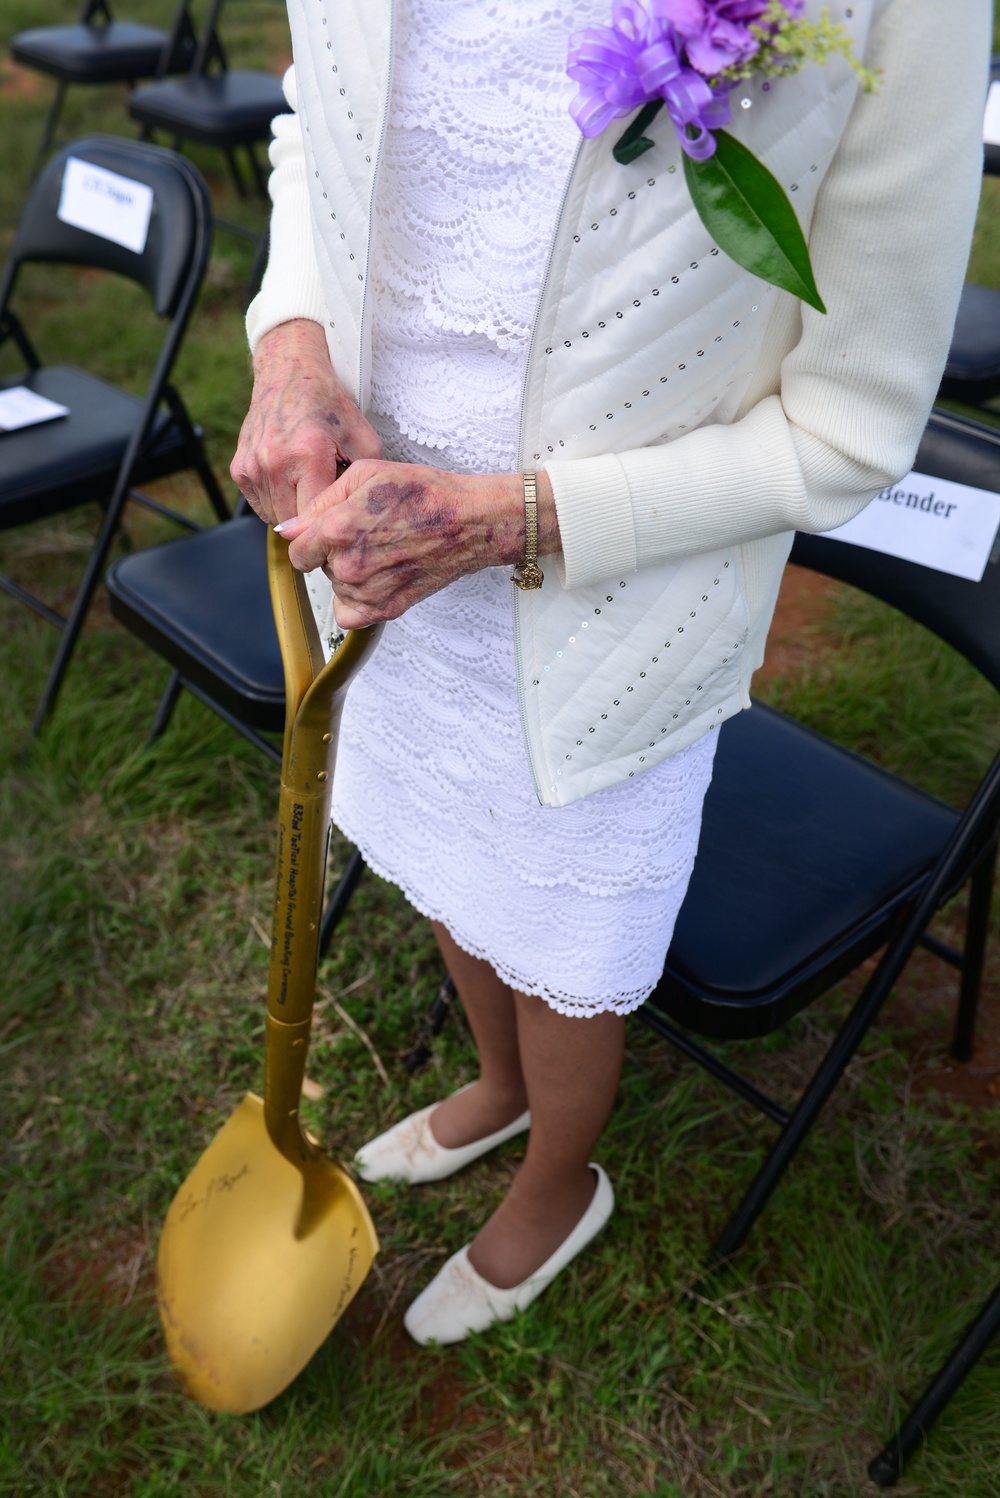 Breaking ground on new medical facility